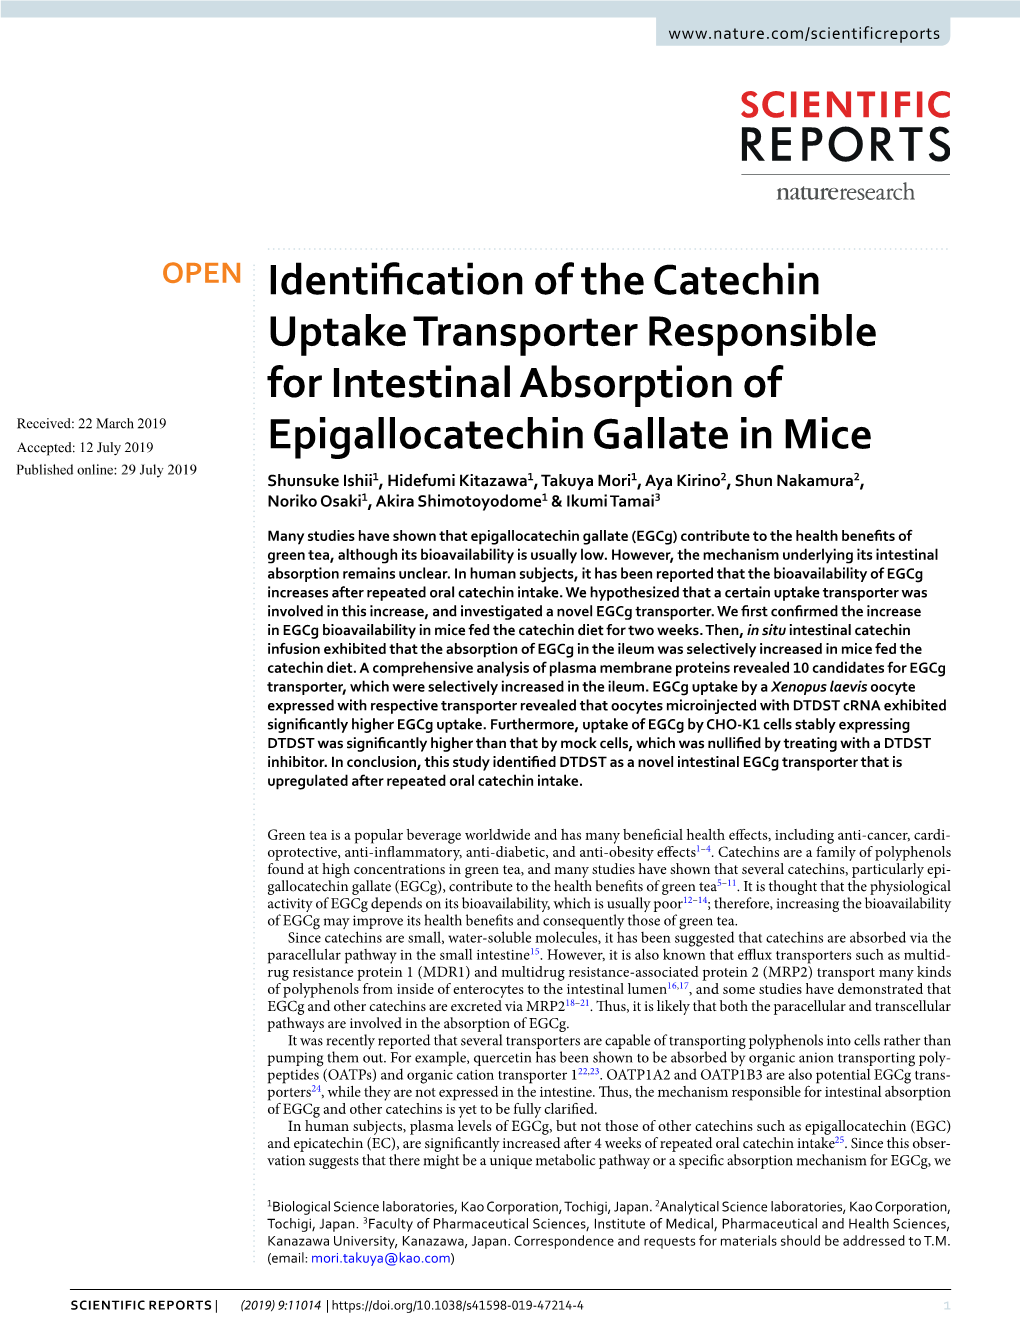 Identification of the Catechin Uptake Transporter Responsible For